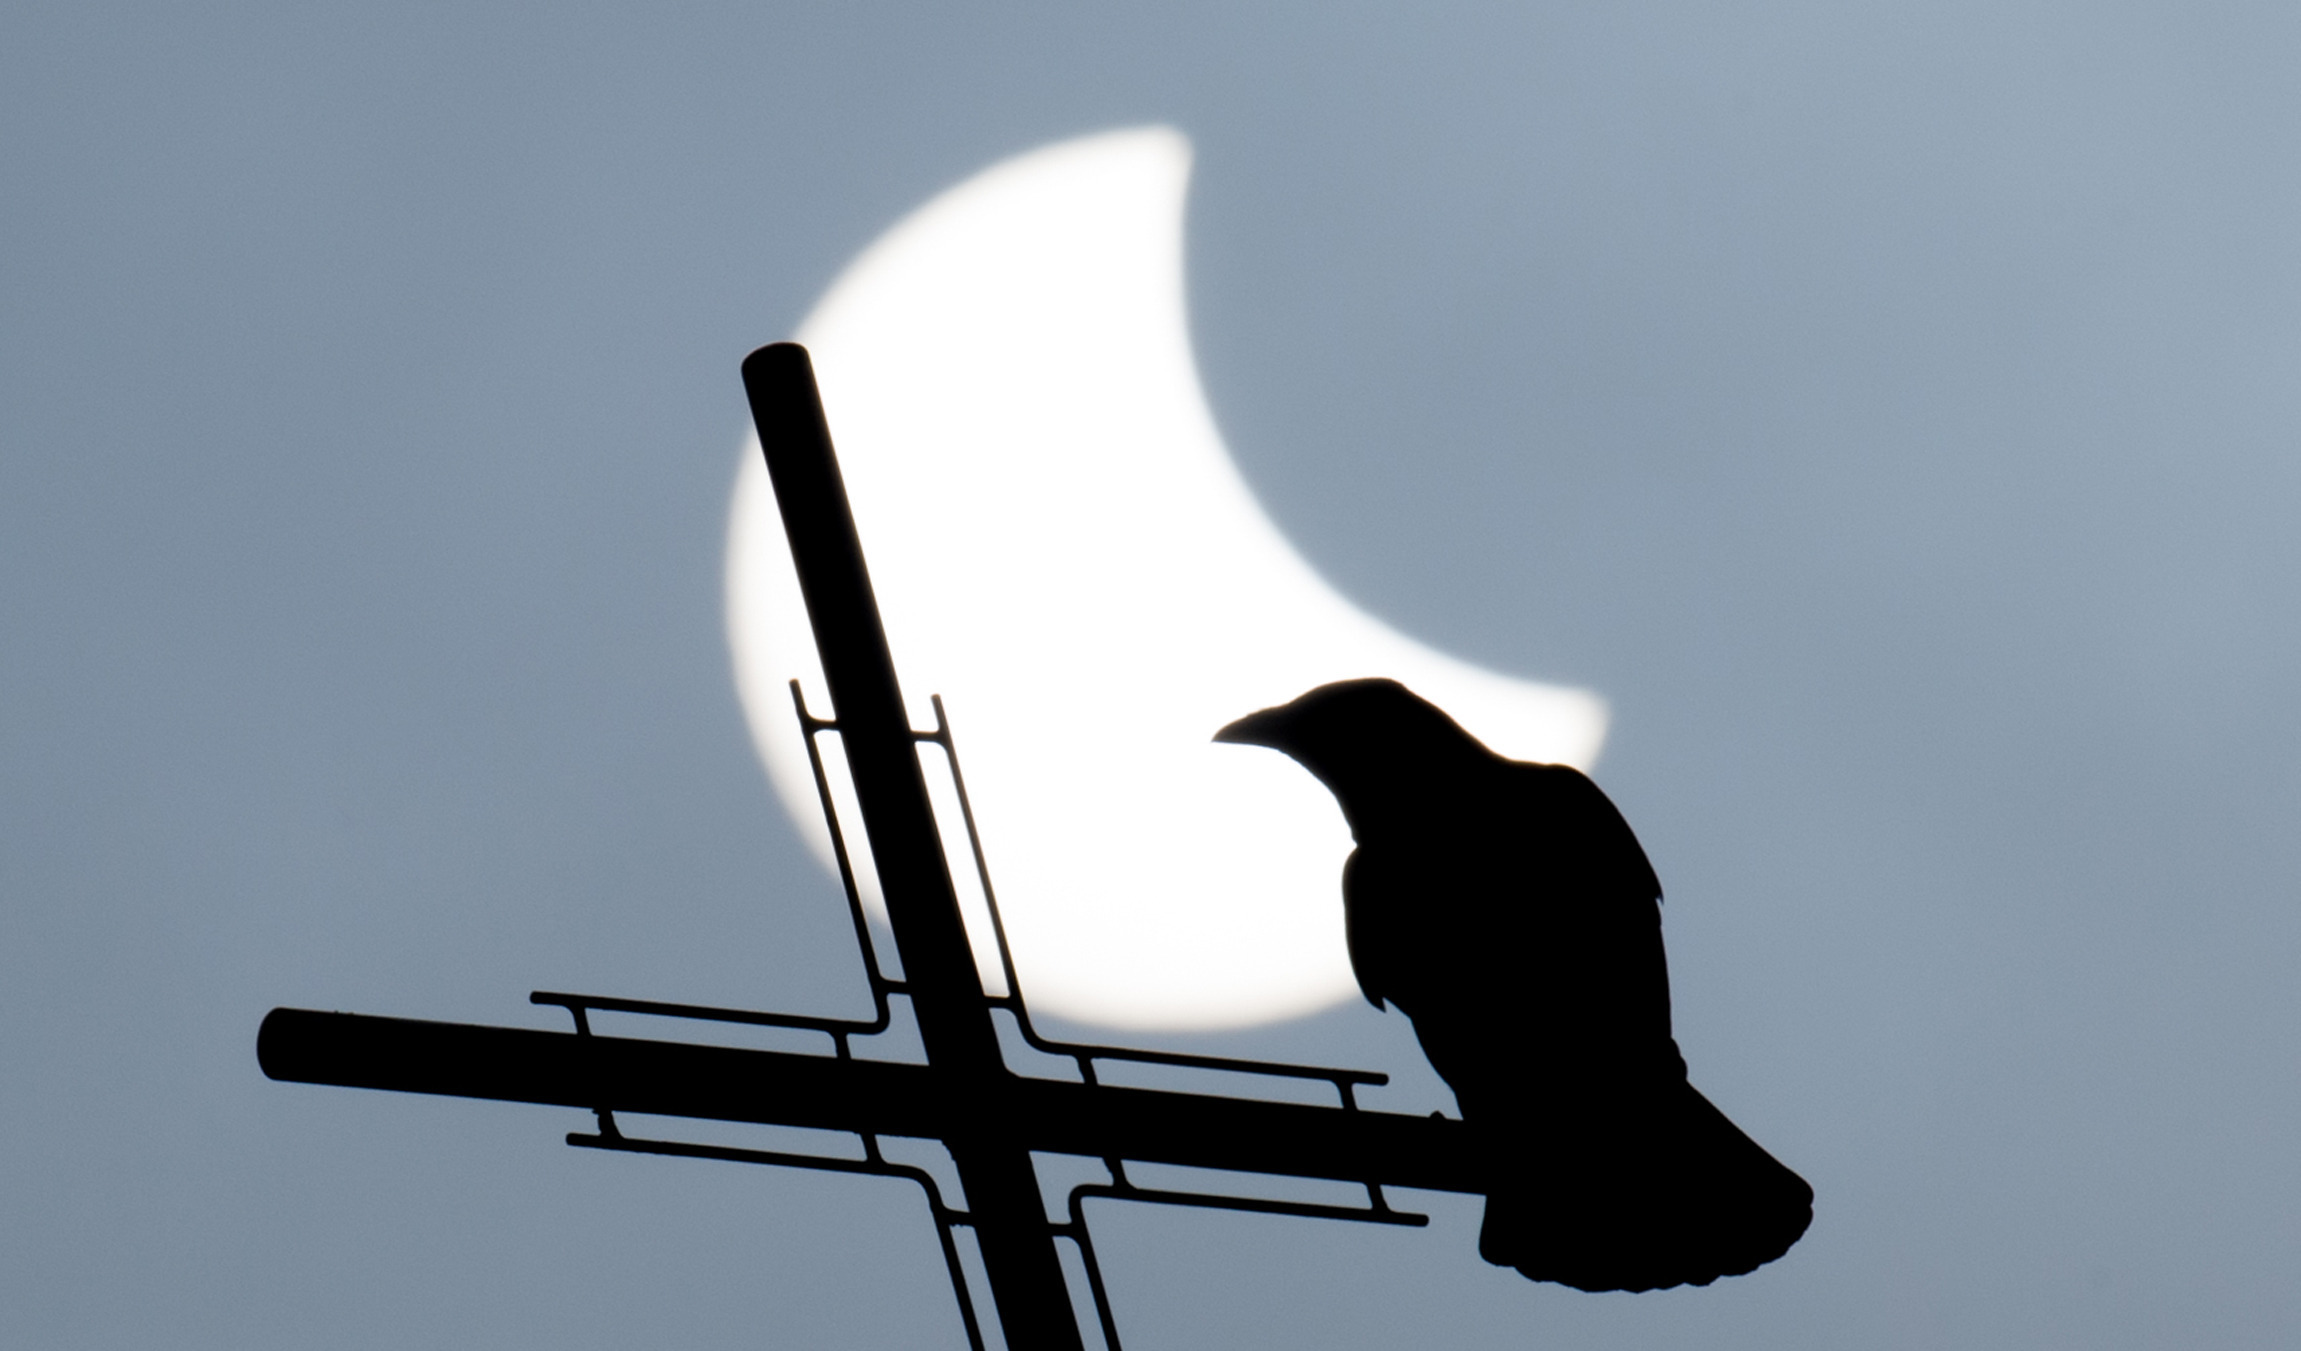 A partial solar eclipse is expected over Finland on Tuesday